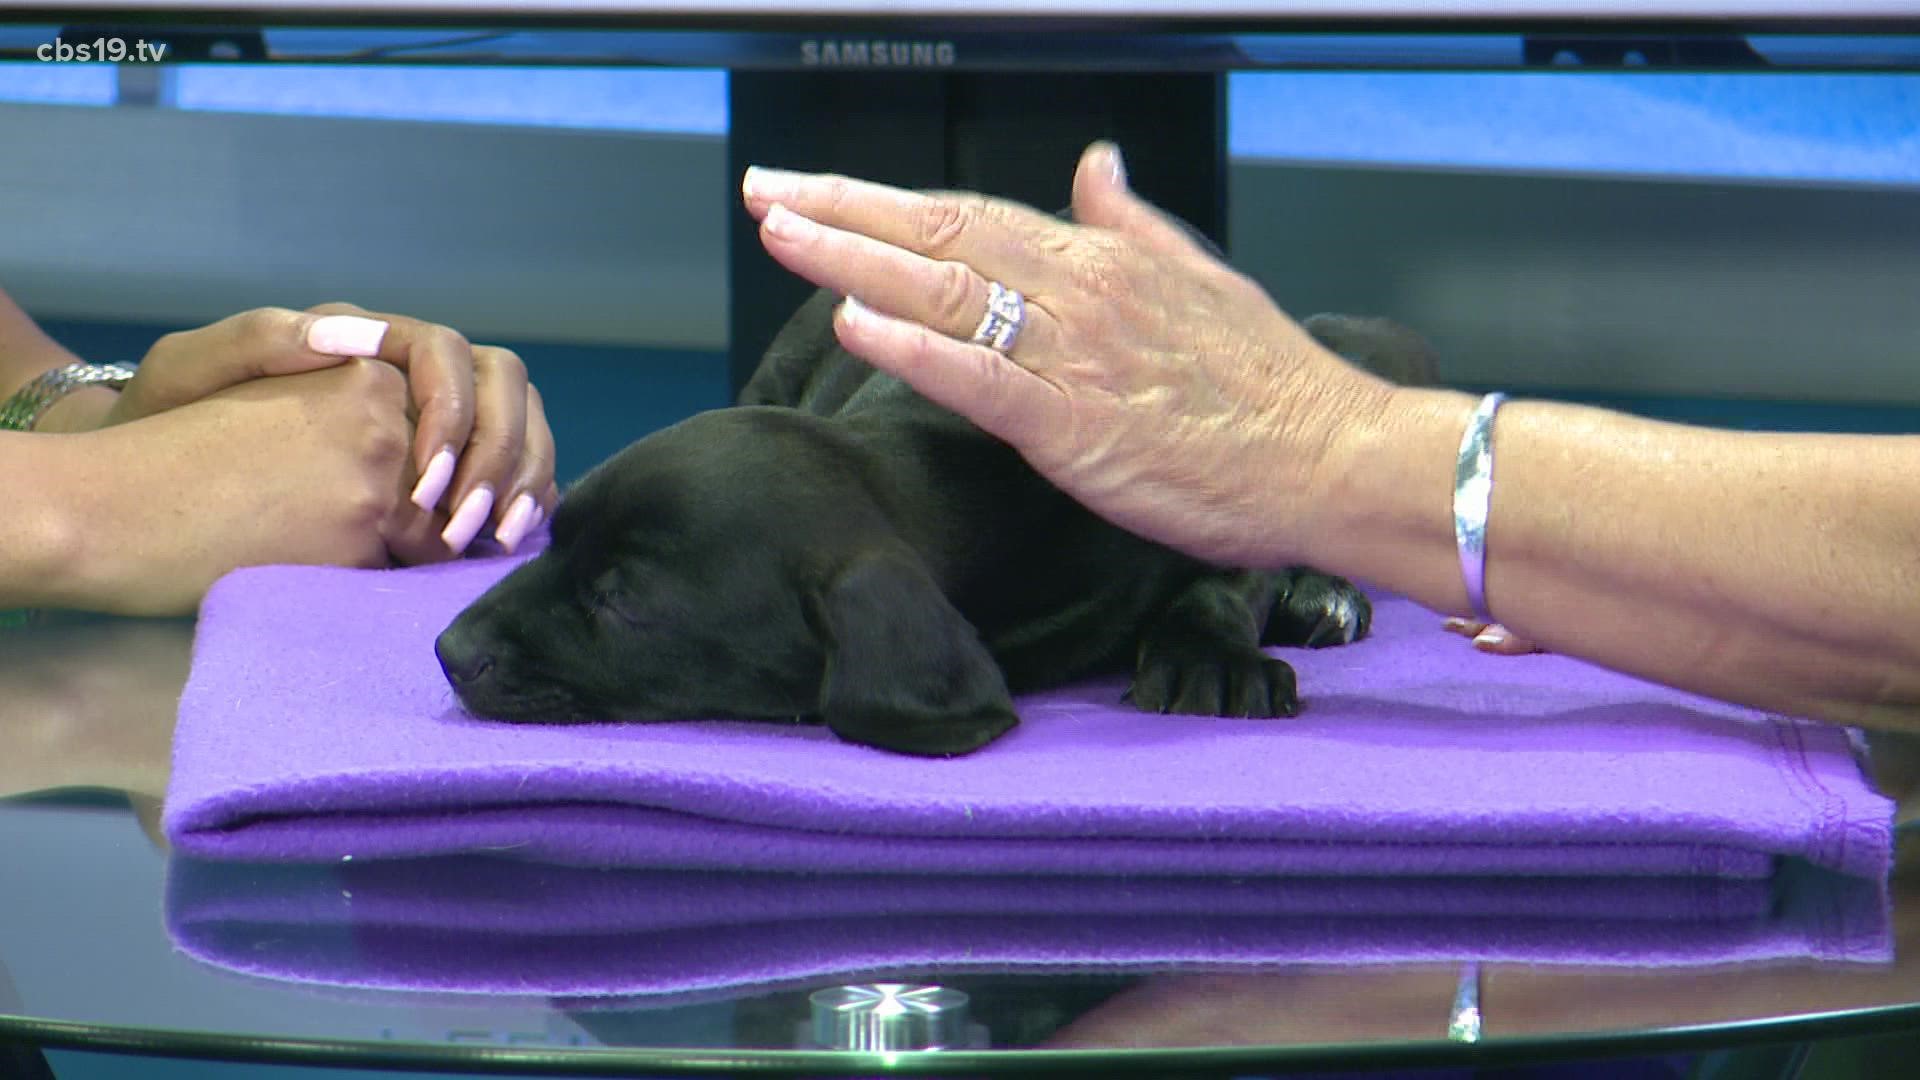 To adopt this sweet pup, visit spcaeasttx.com.